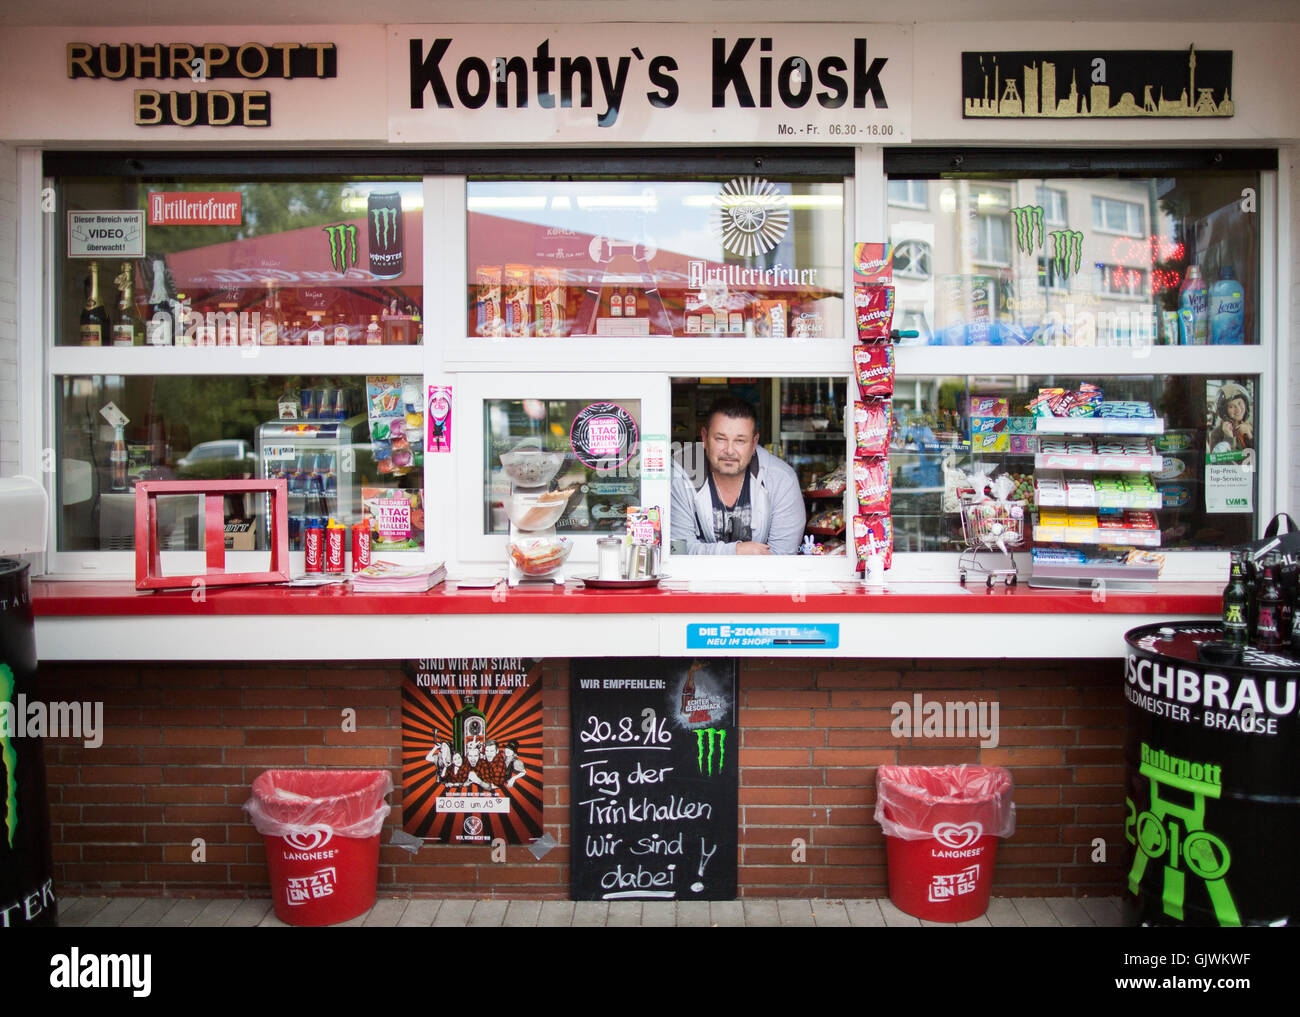 Kiosk owner andreas Kontny posing in Kontny's Kiosk in Muelheim an der  Ruhr, Germany, 15 August 2016. On 20 August 2016, the '1. Tag der  Trinkhallen' (lit '1st Day of Refreshment Stands')